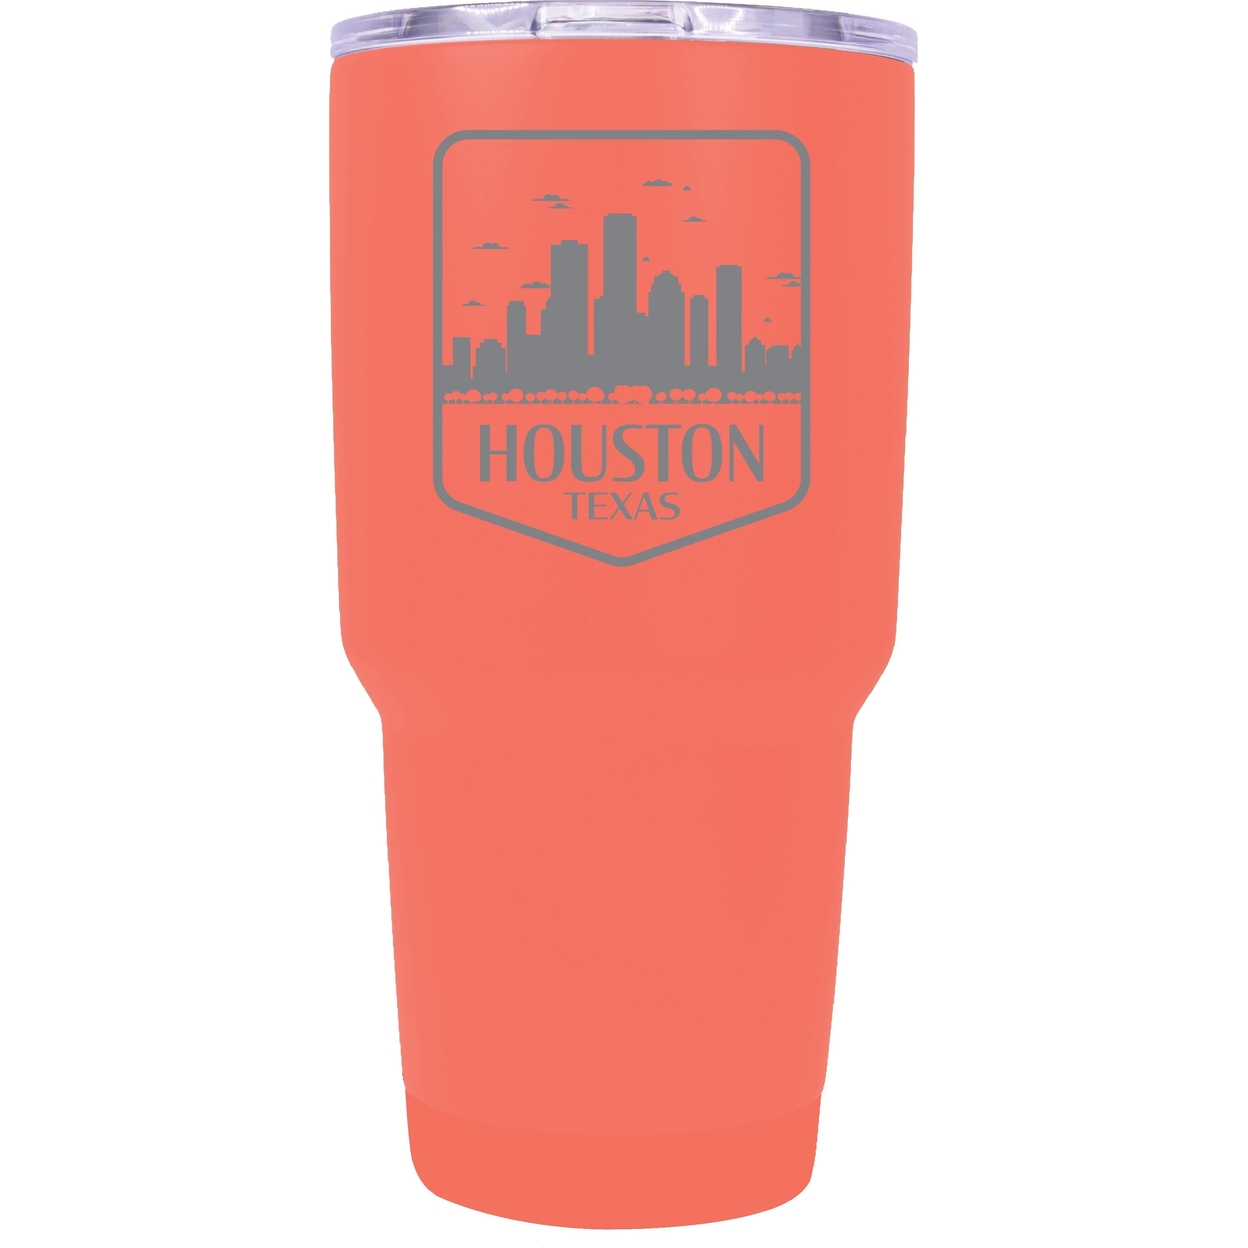 Houston Texas Souvenir 24 Oz Engraved Insulated Stainless Steel Tumbler - Coral,,4-Pack